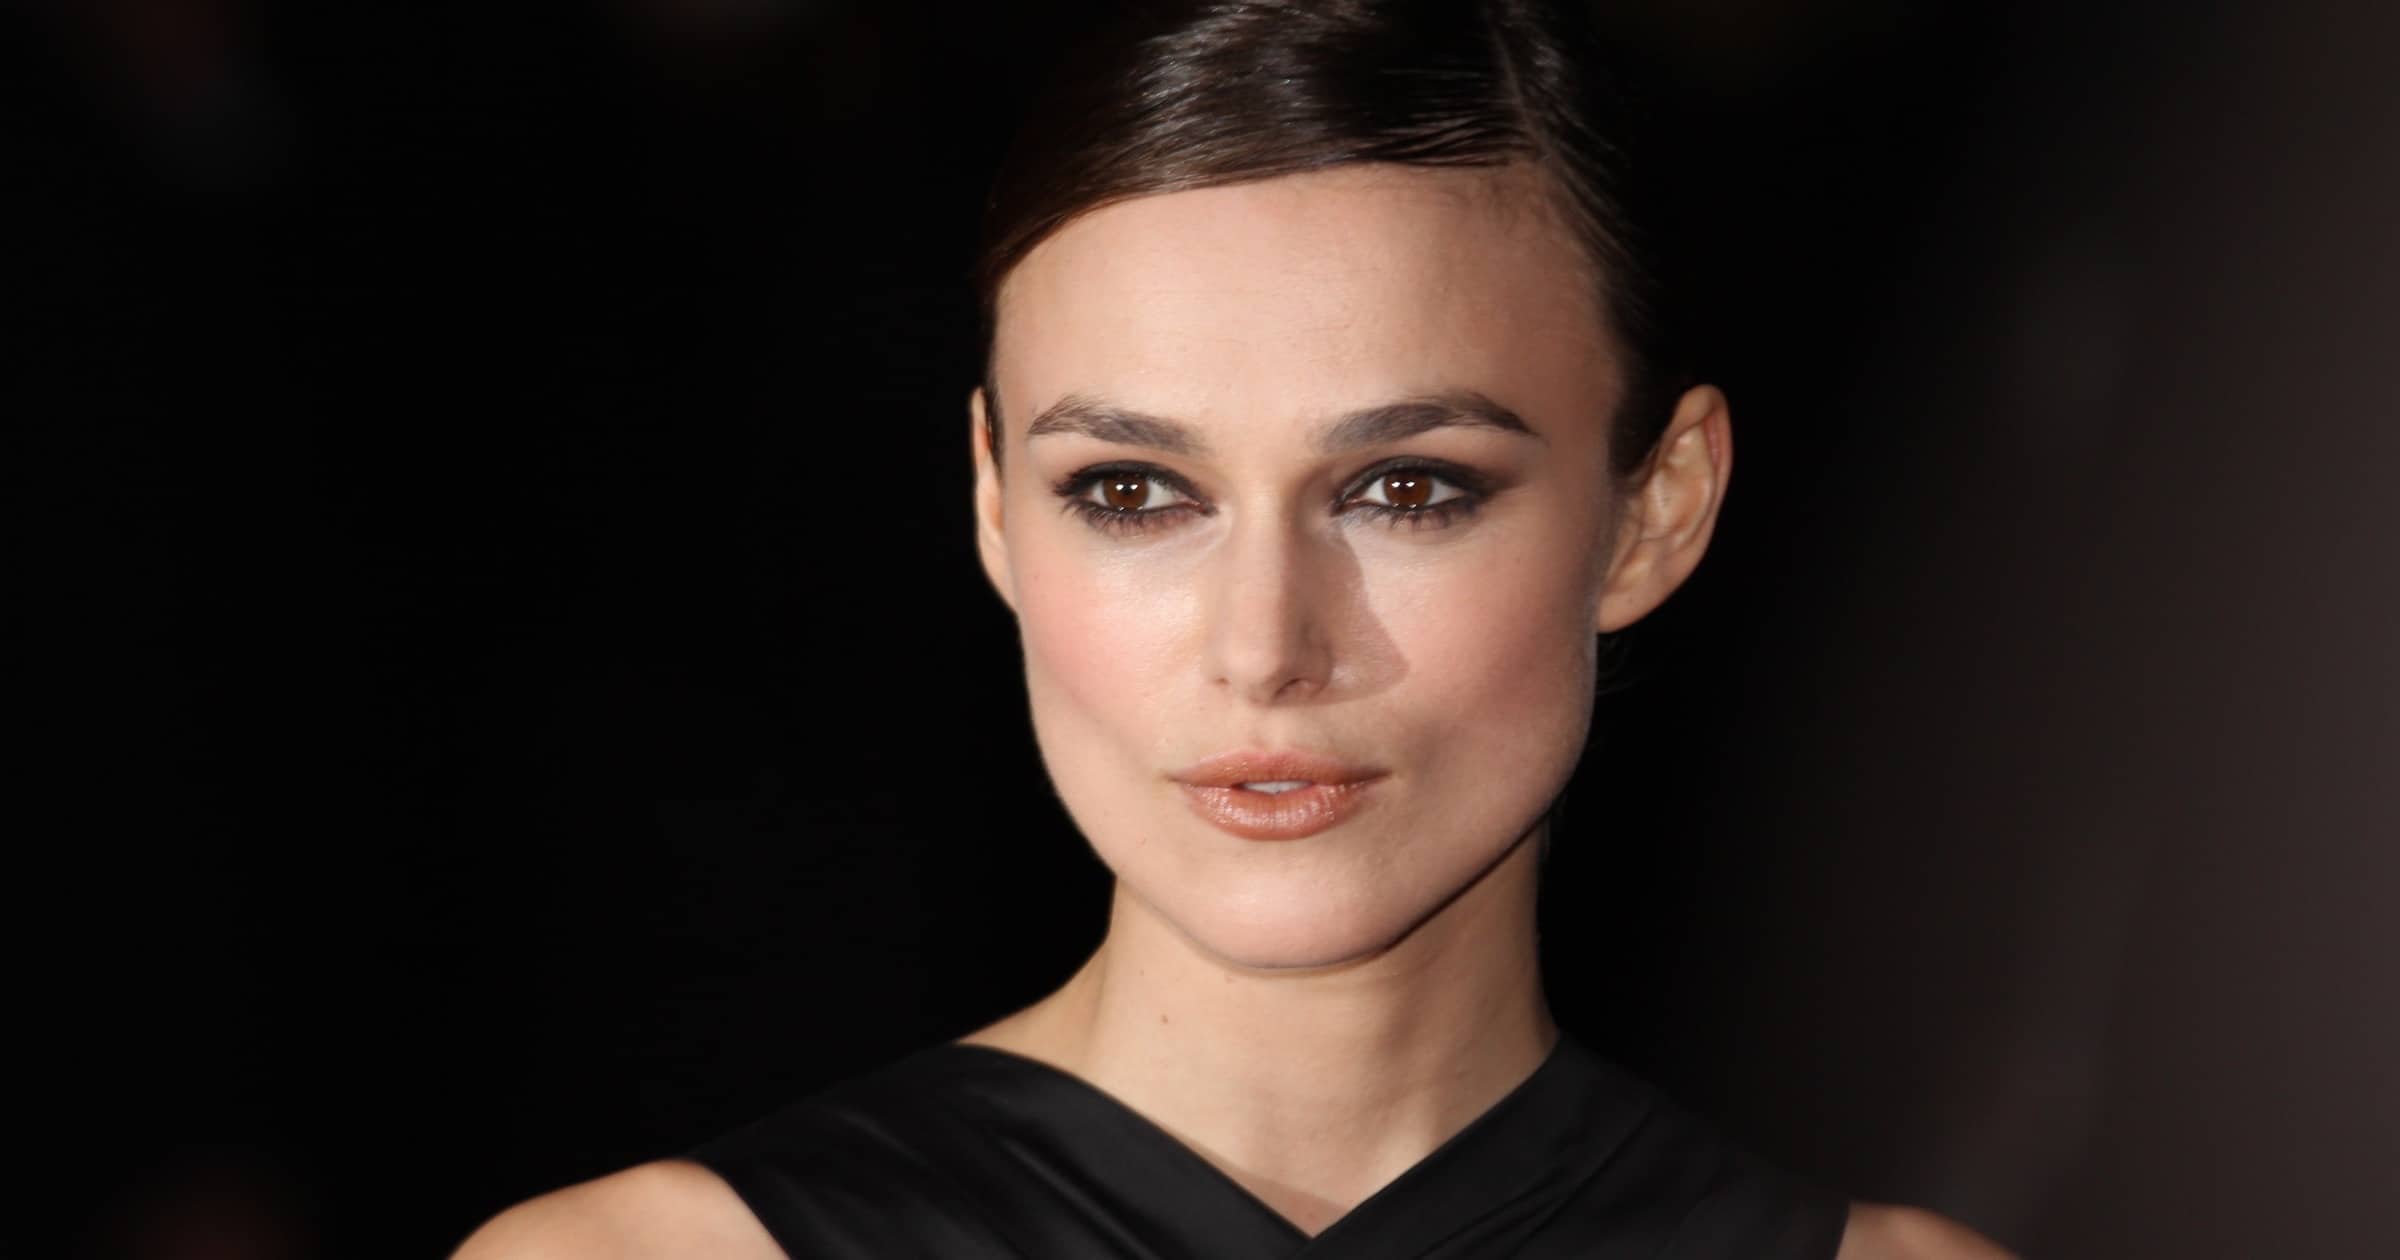 Keira Knightley to Star in ‘The Essex Serpent’ for Apple TV+